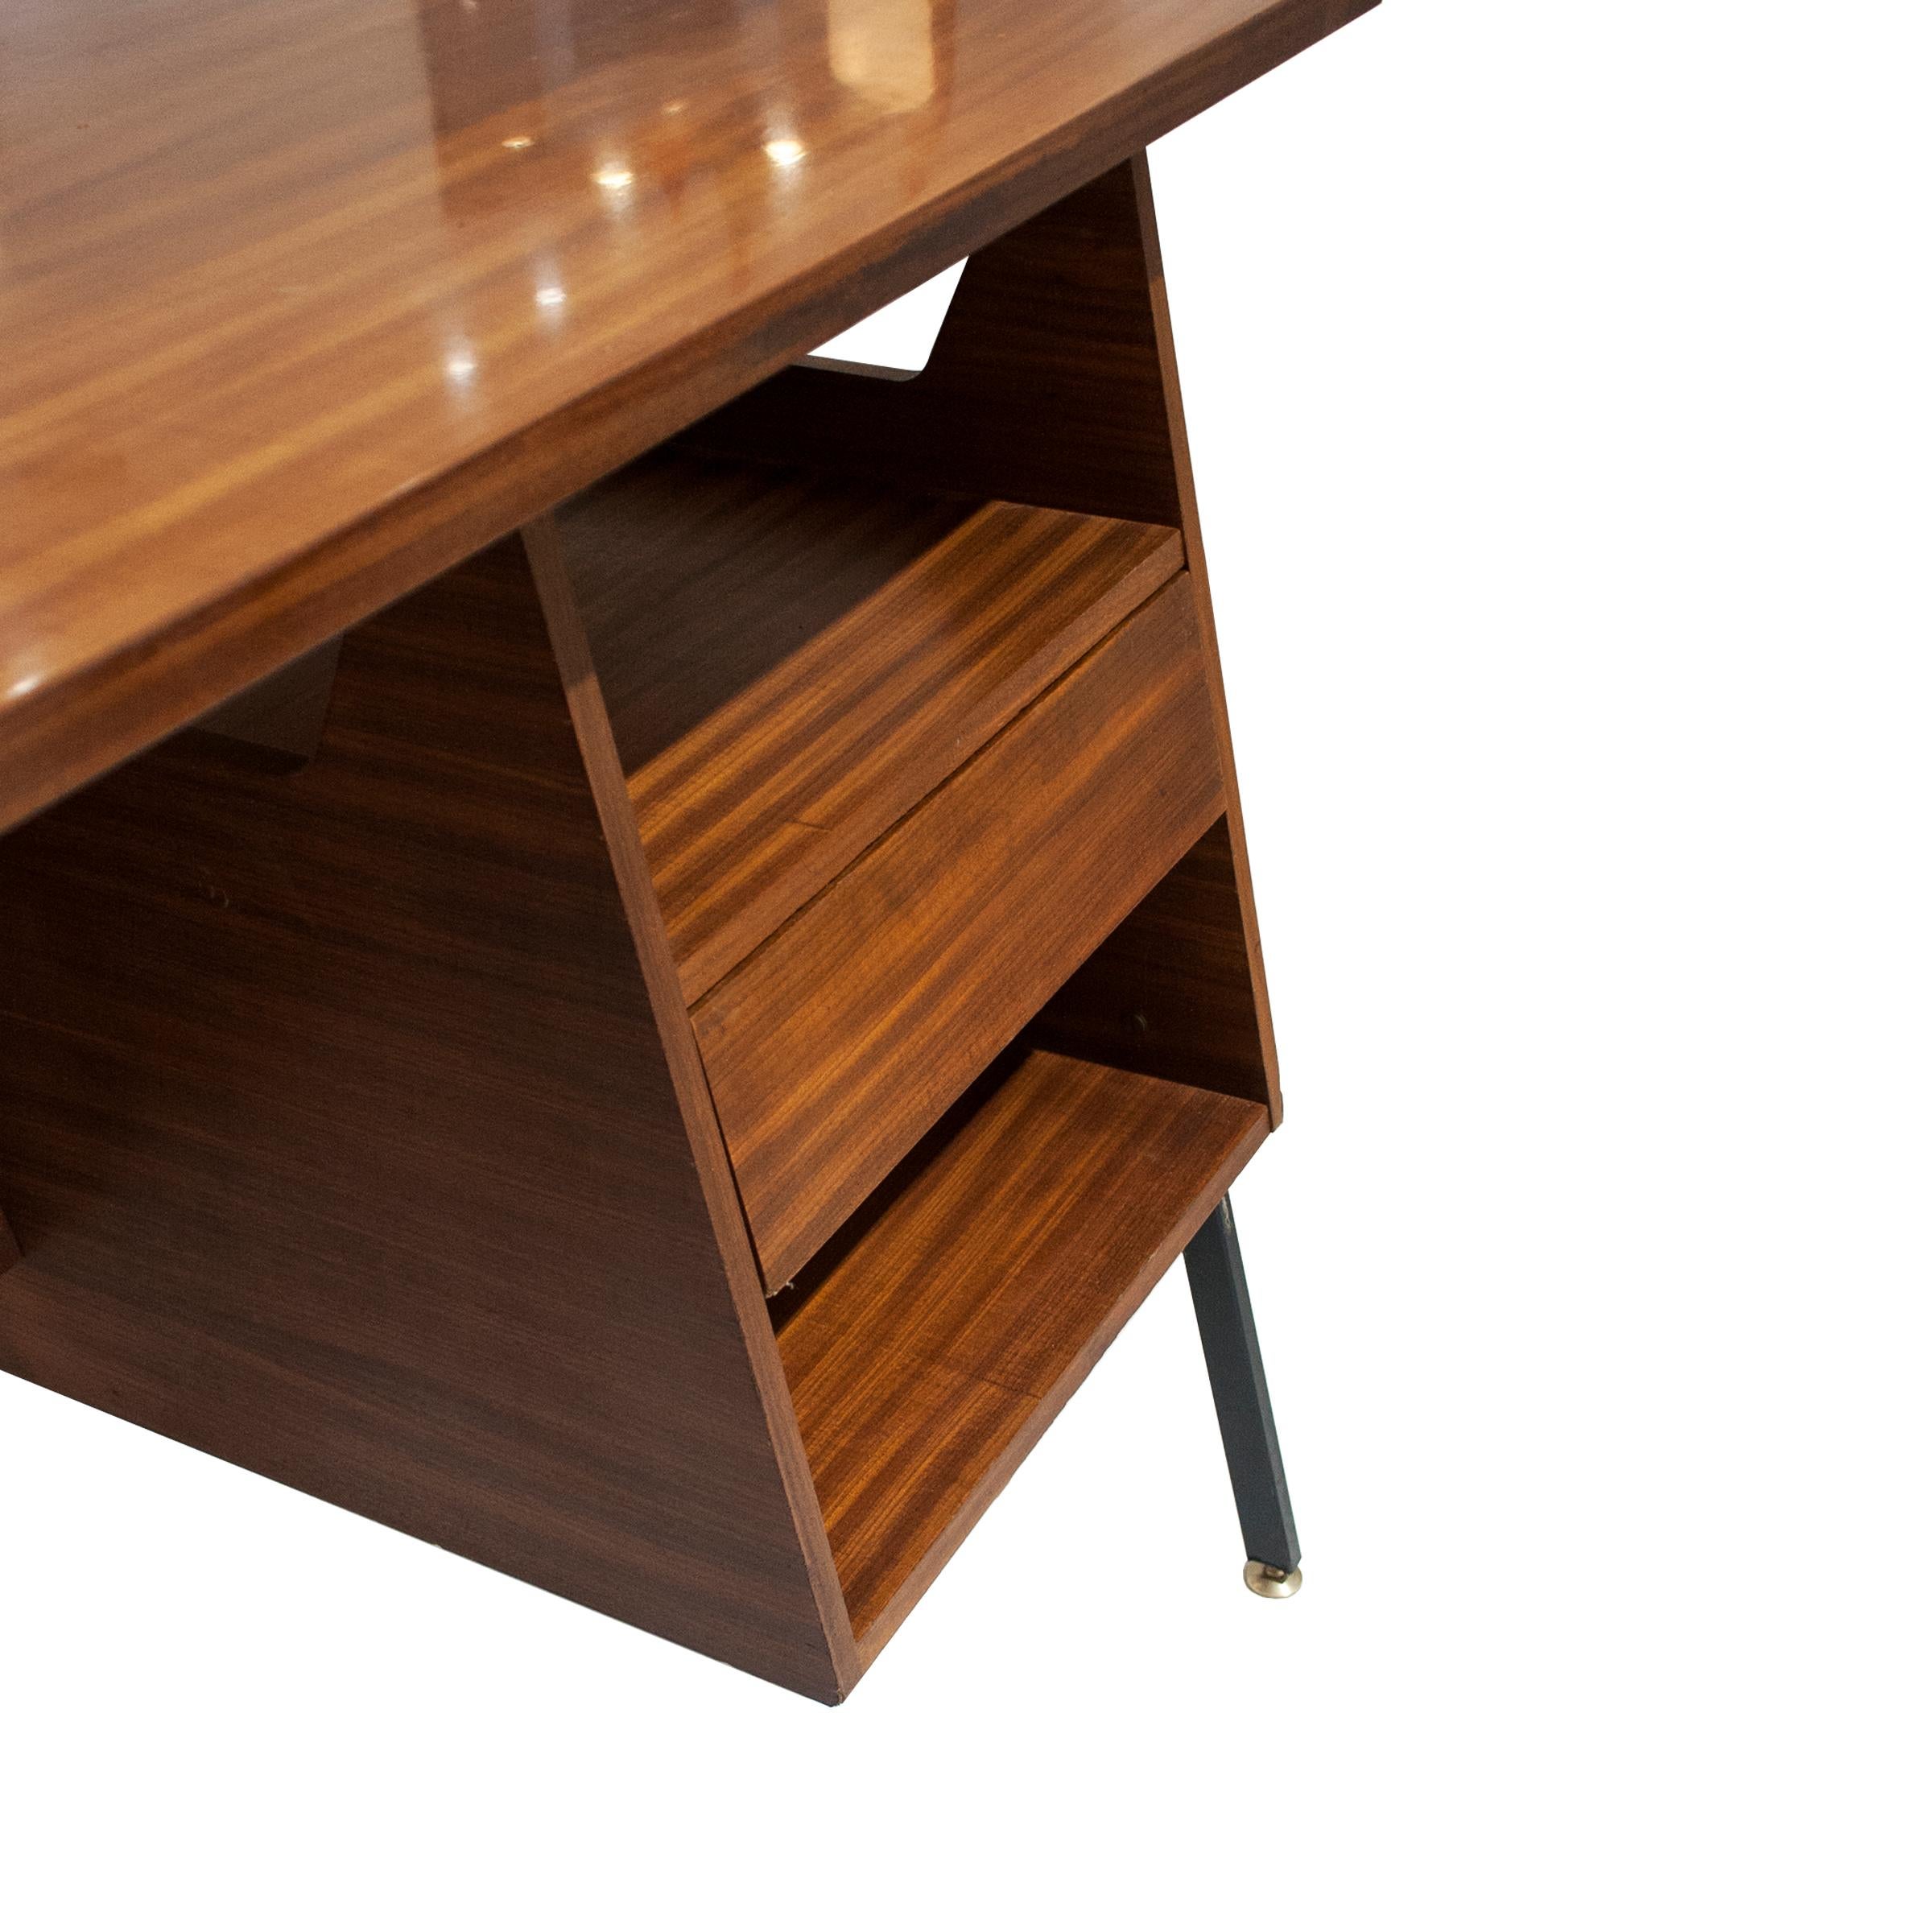 Mid-20th Century Mid-Century Modern Italian Teak Desk with Lacquered Brass Structure, Italy, 1950 For Sale